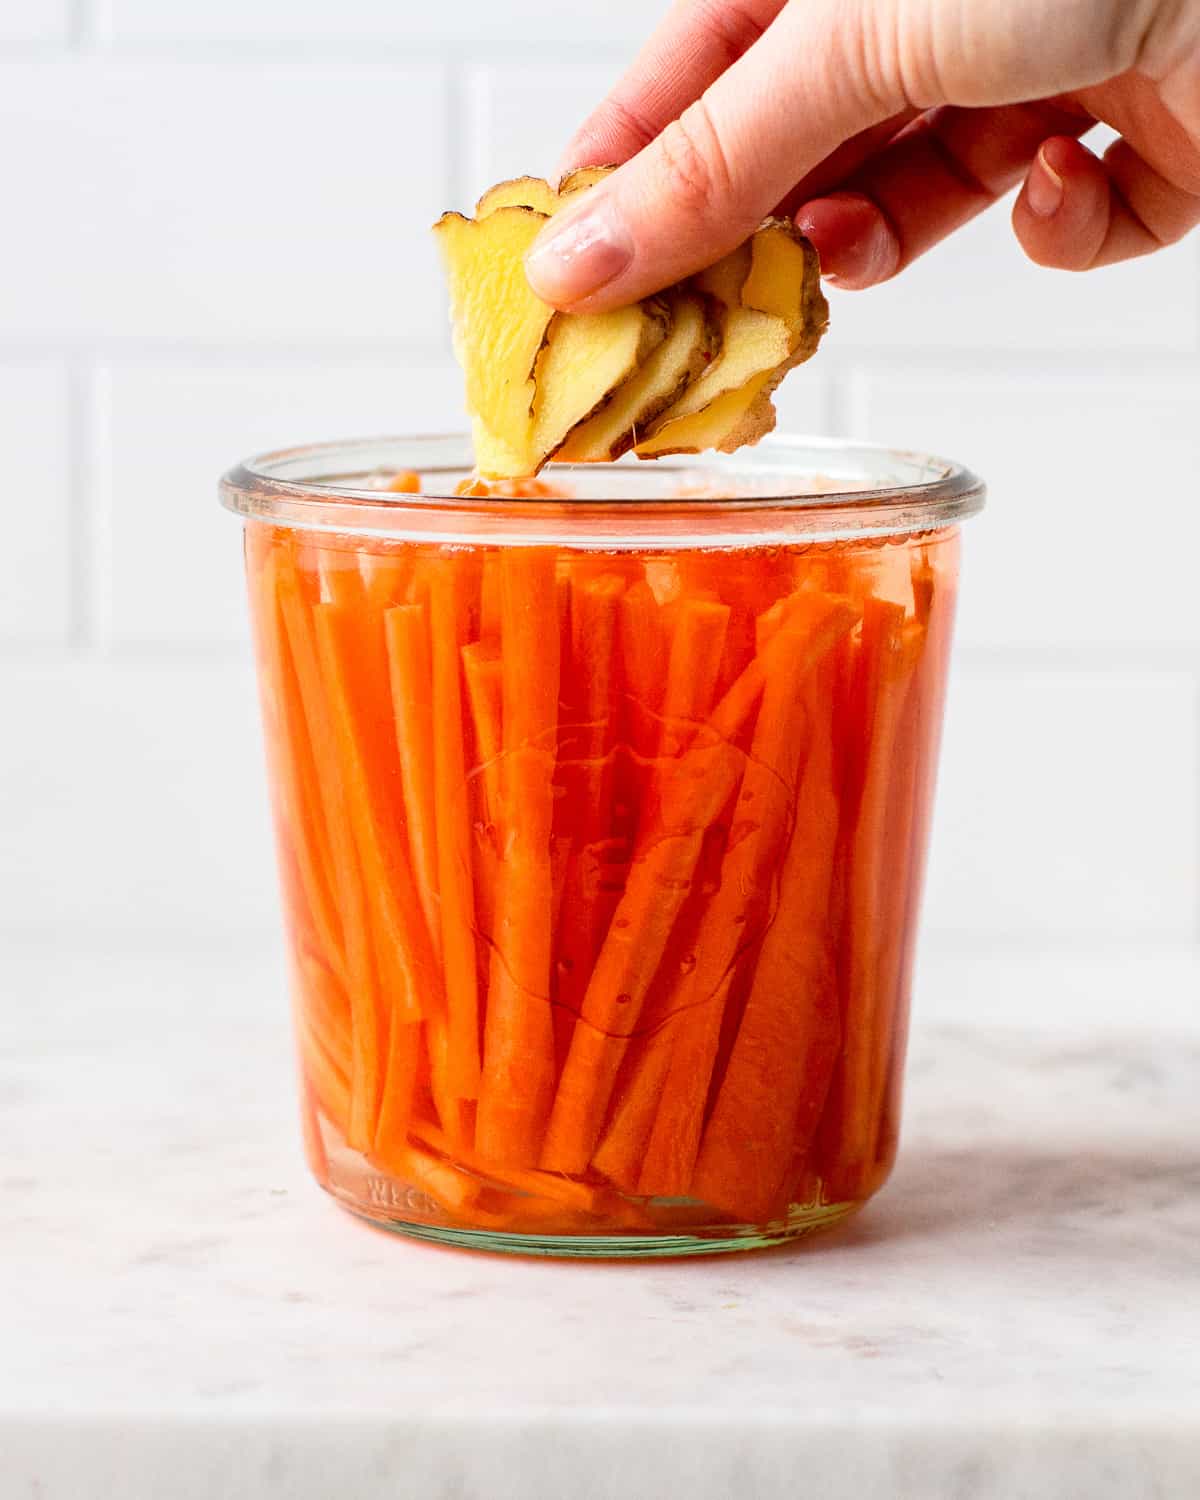 Hand adding sliced ginger to a glass jar with carrot sticks.